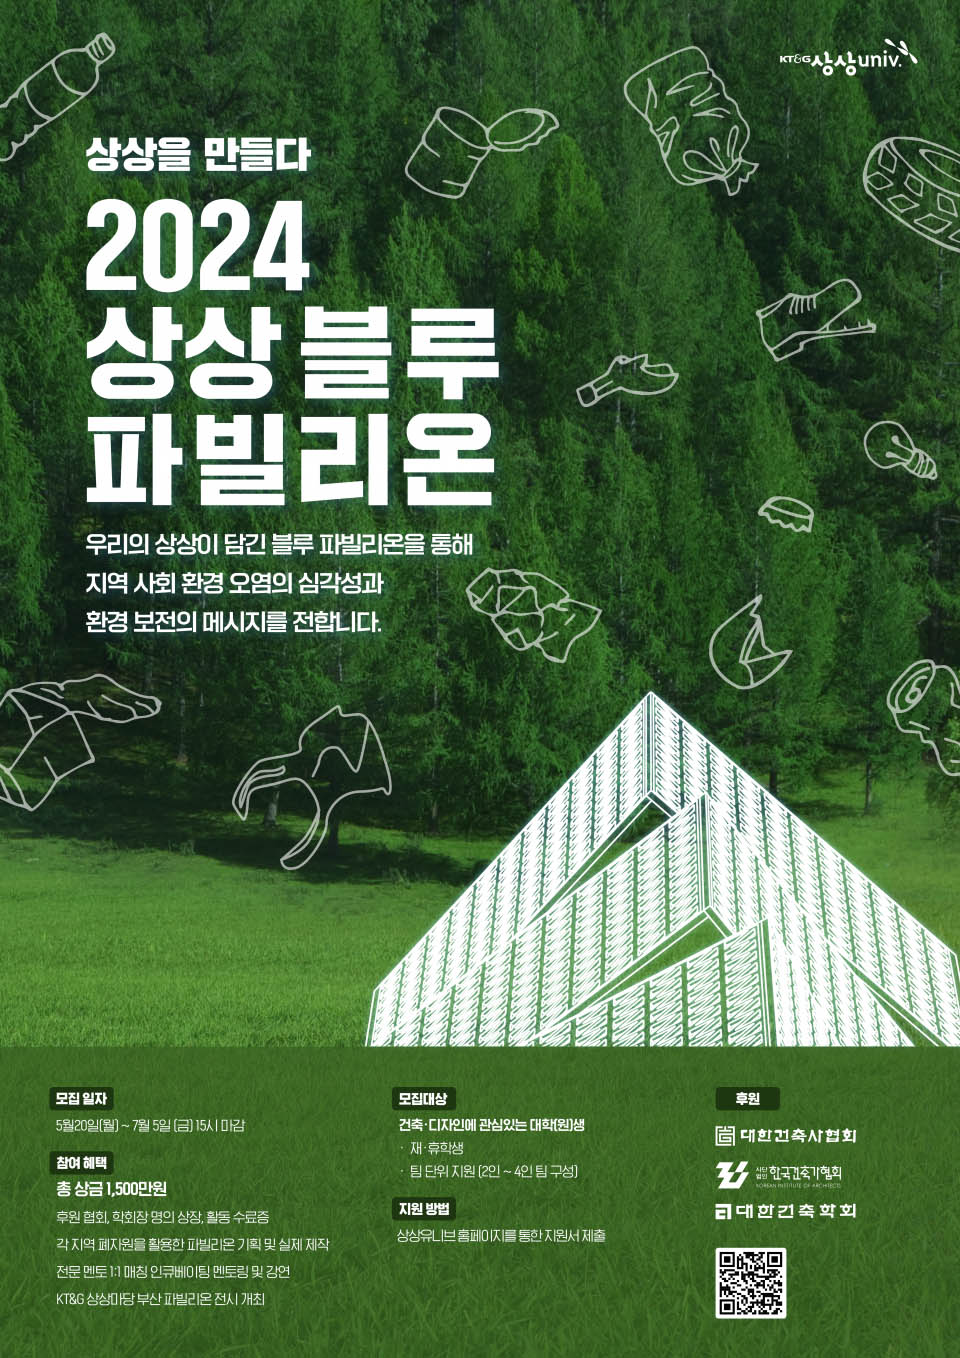 You are currently viewing KT&G 상상유니브 ‘2024 상상 블루 파빌리온 안내